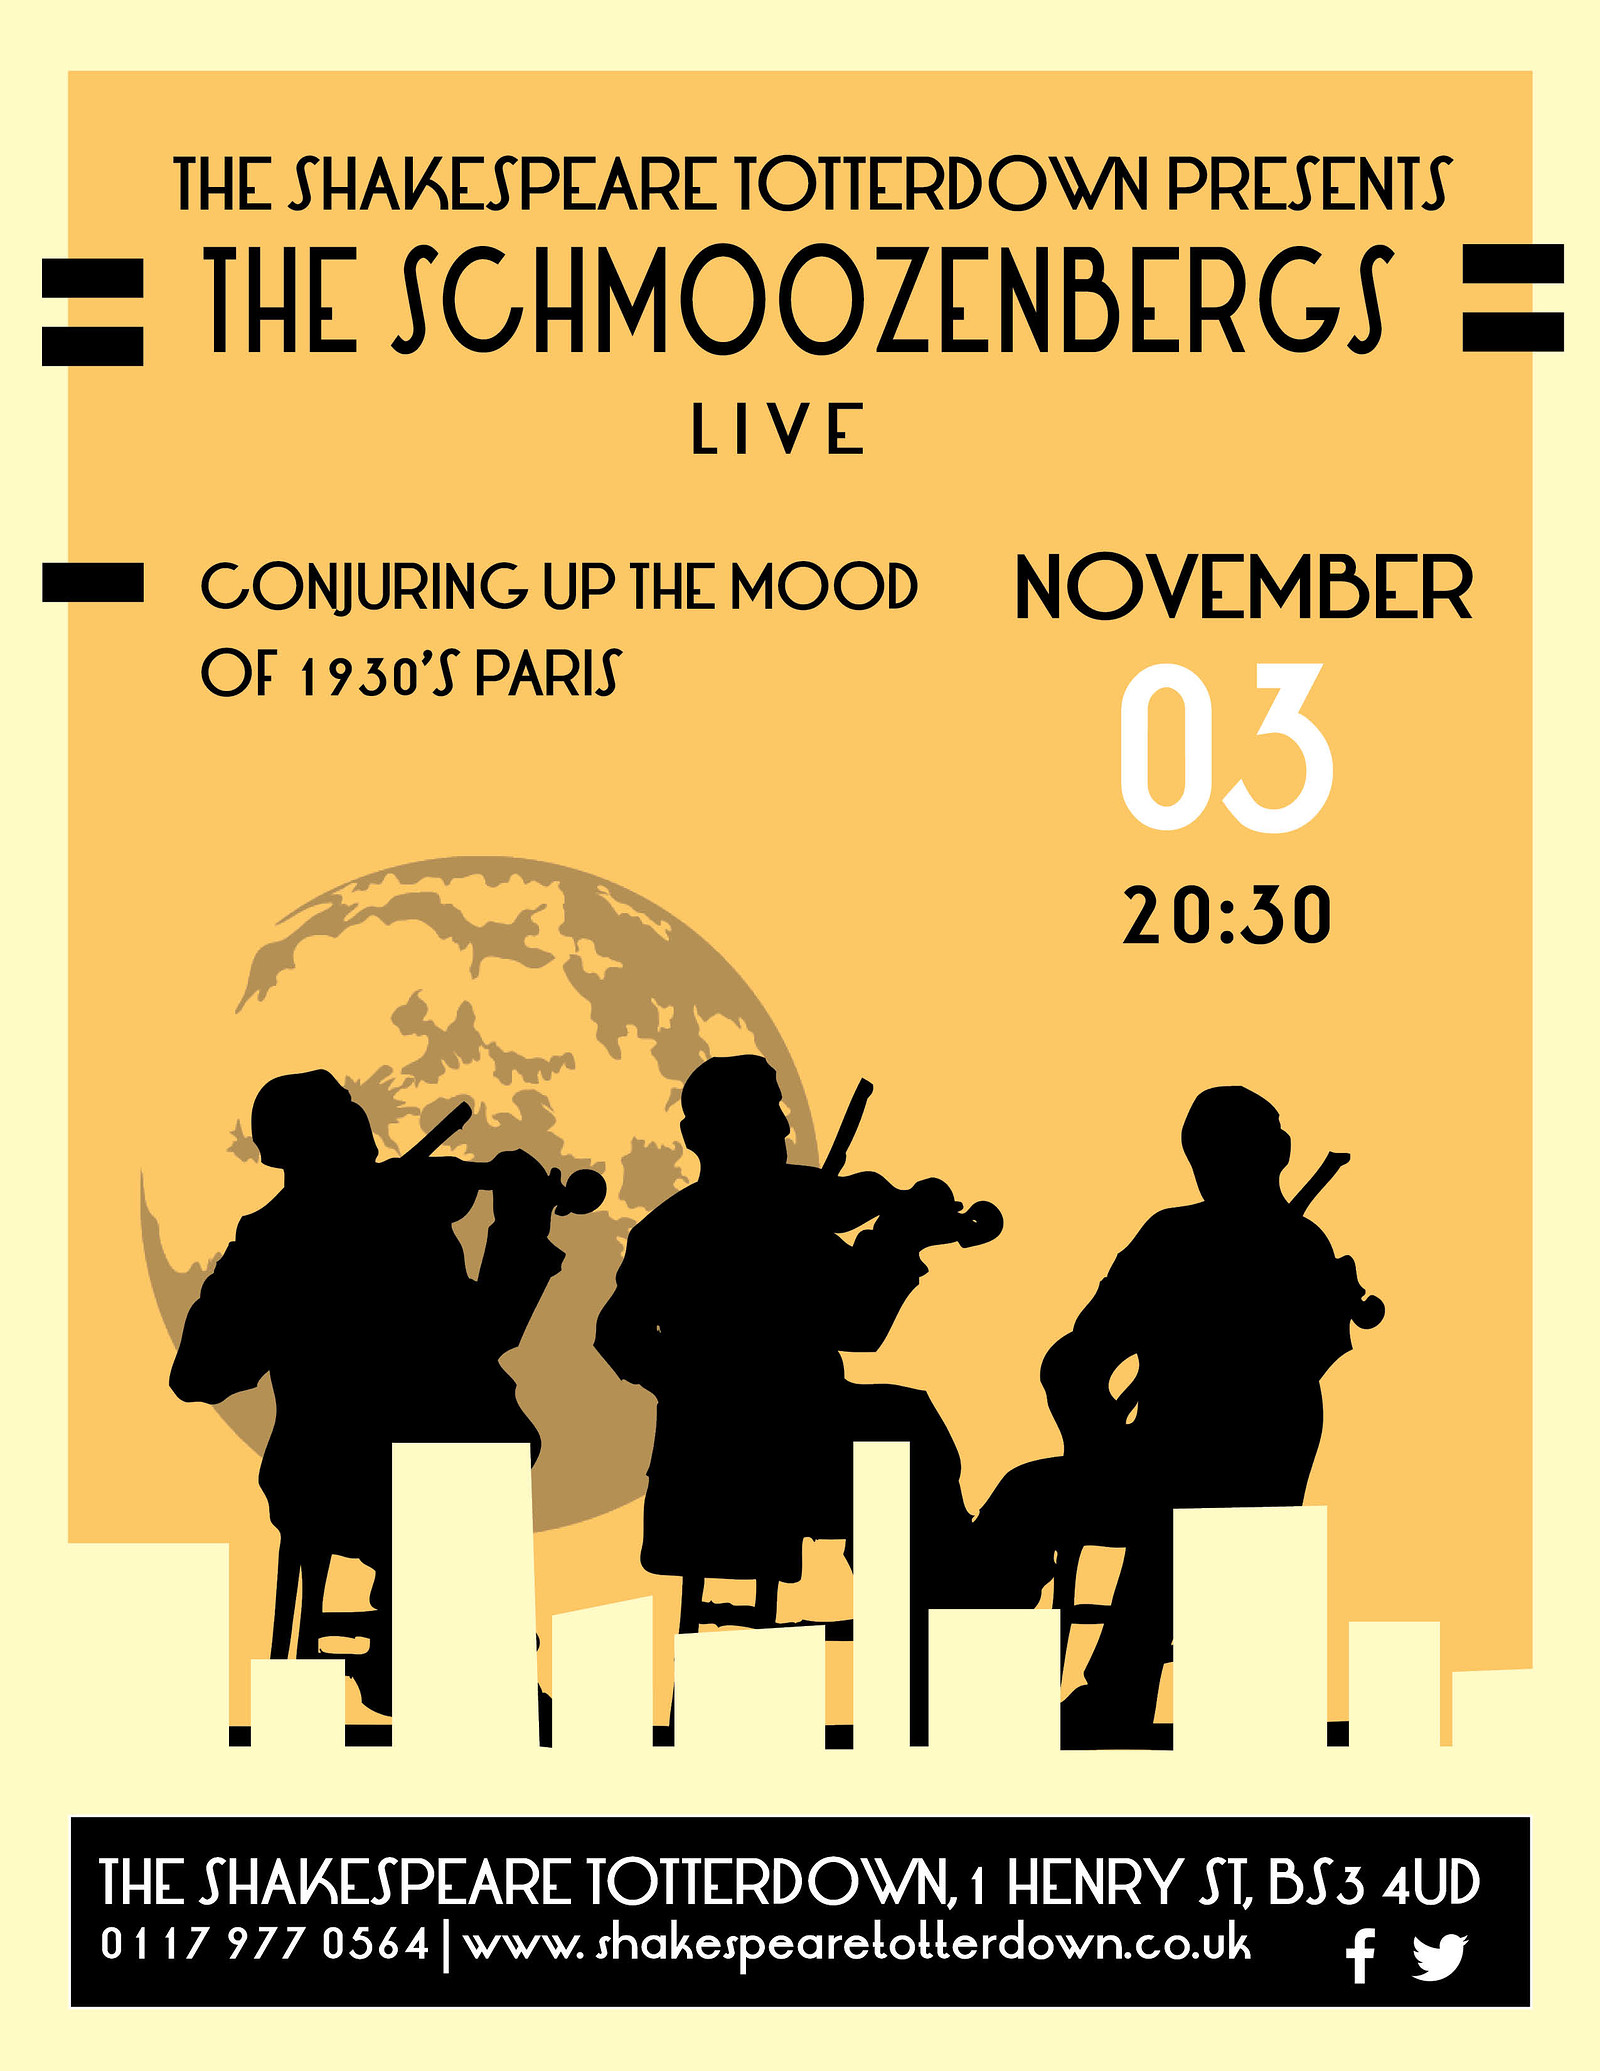 The Schmoozenbergs at The Shakespeare Totterdown